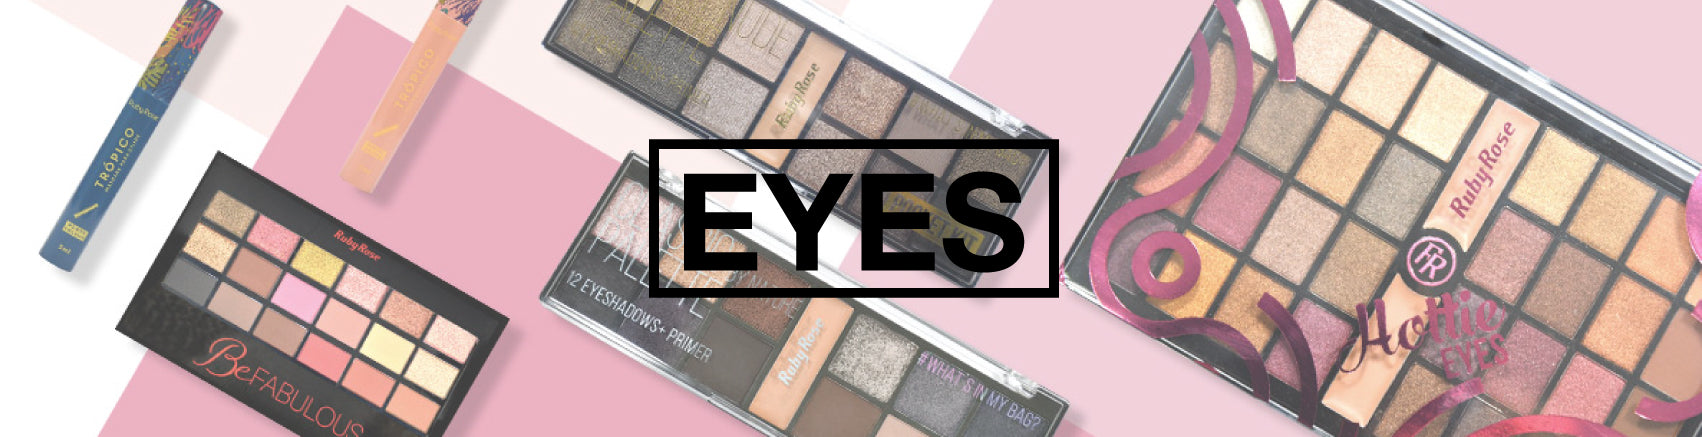 eyes ruby rose makeup lebanon delivery online